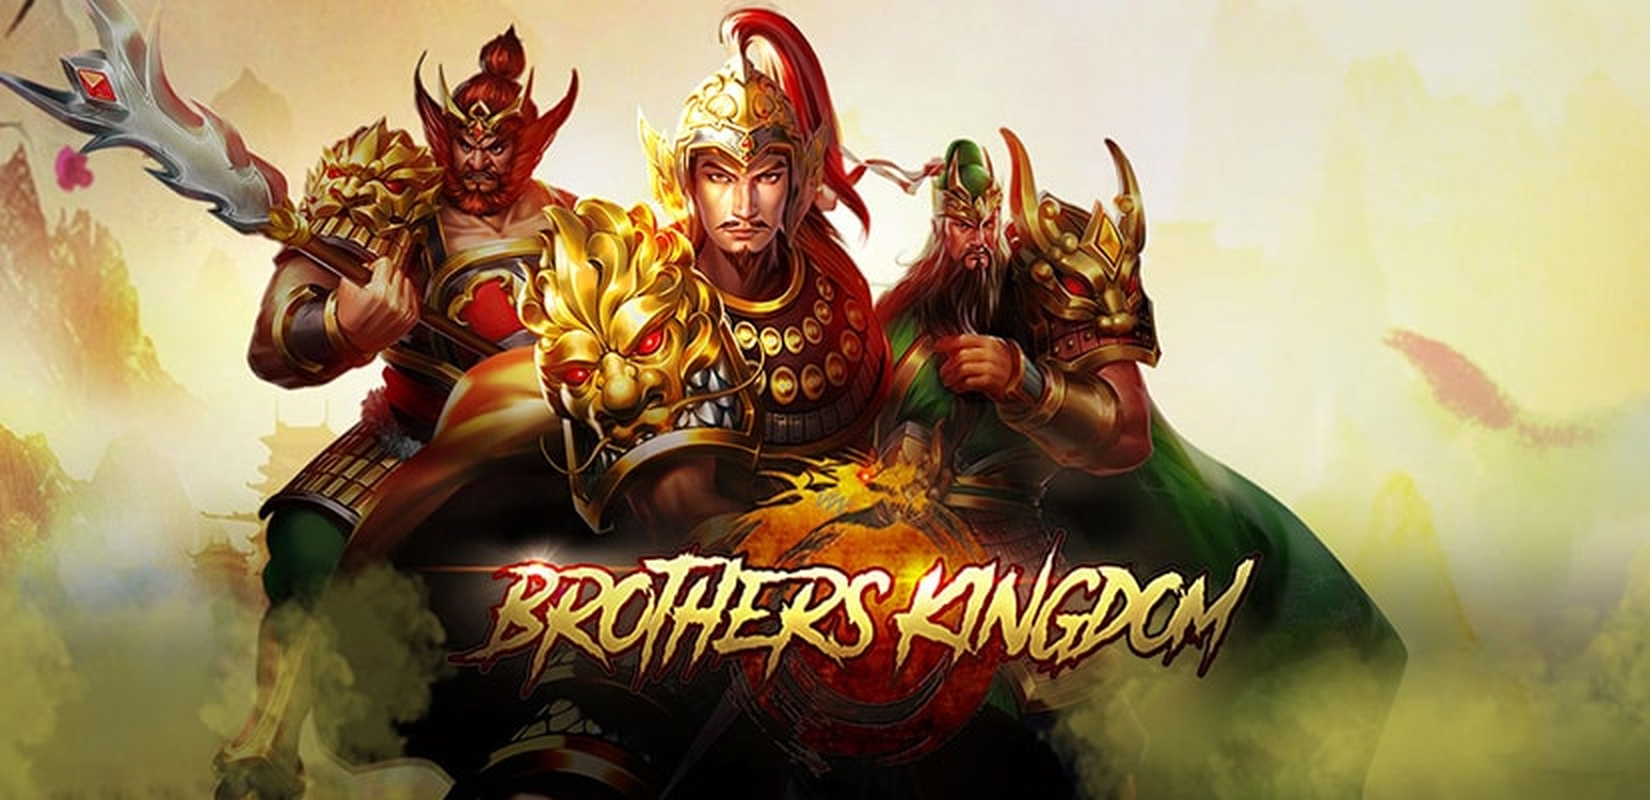 The Brothers Kingdom Online Slot Demo Game by Spade Gaming